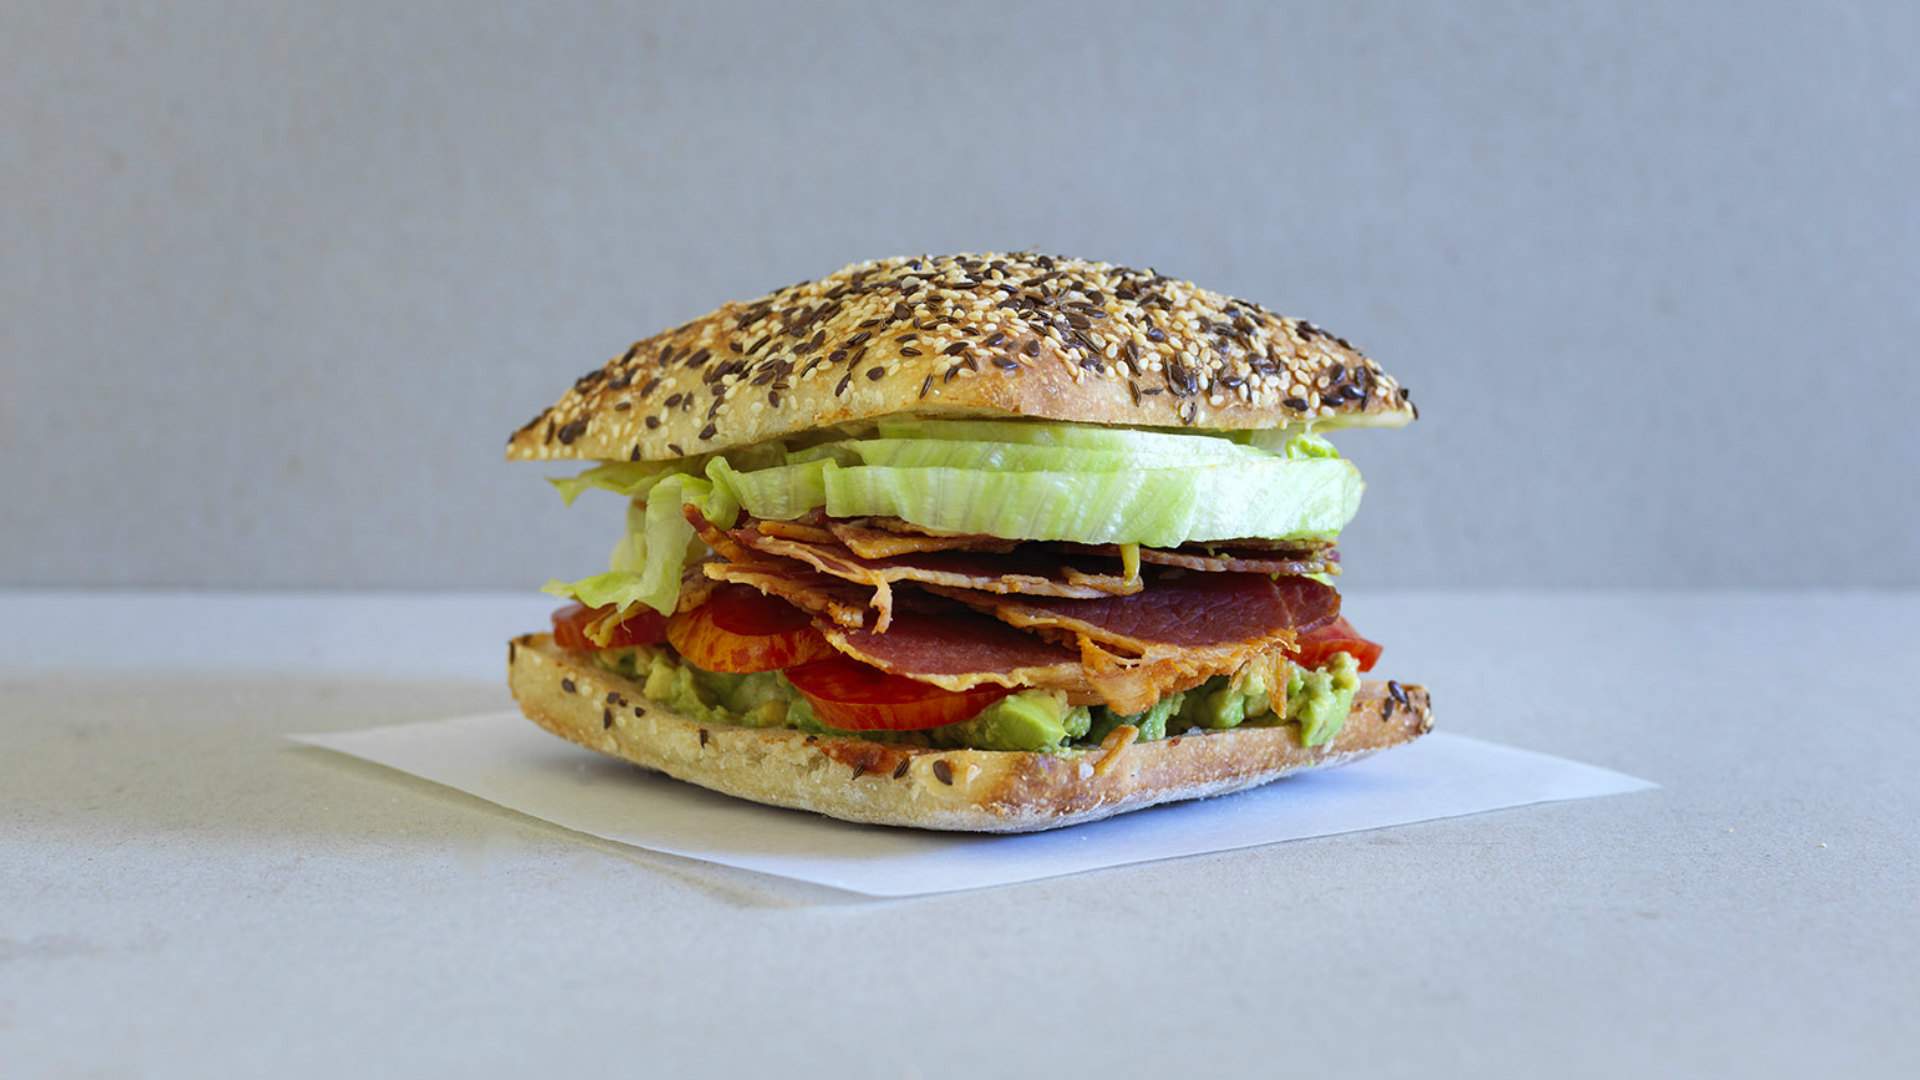 The Dolphin Hotel Launches Lovingly Photographed Casual Sandwich Menu